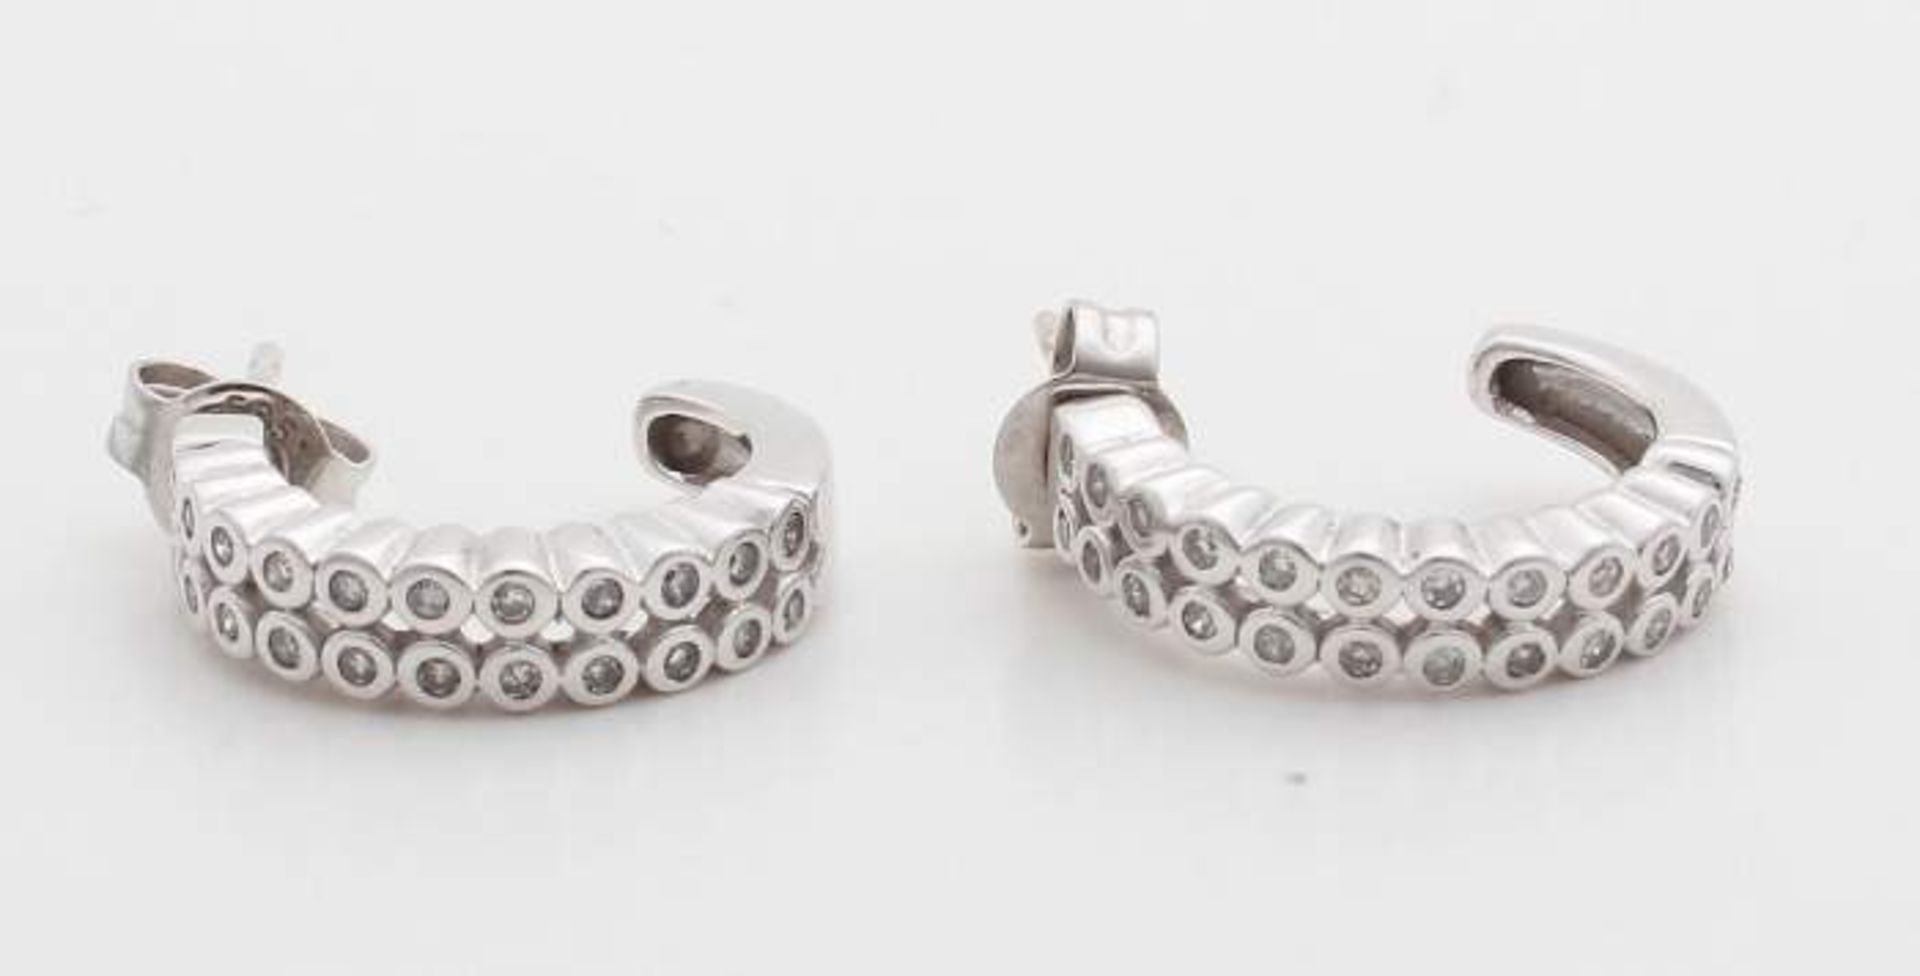 White gold earrings, 585/000, with brilliants. Creoles with two rows of small smooth conversions set